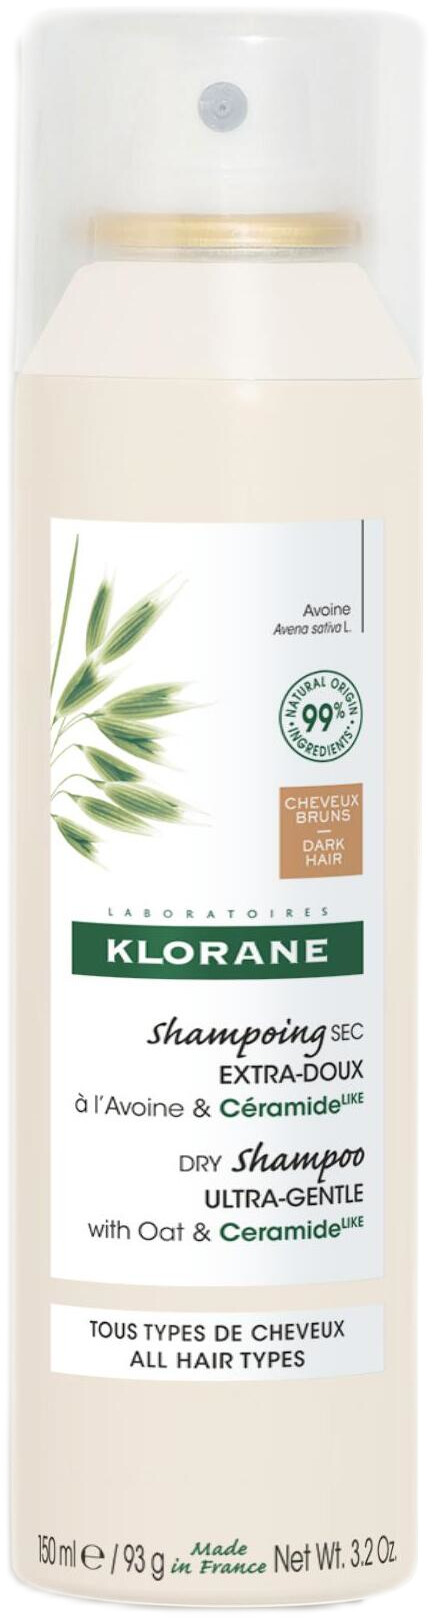 Klorane Dry Shampoo Ultra Gentle with Oat and CeramideLike for Dark Hair 150ml